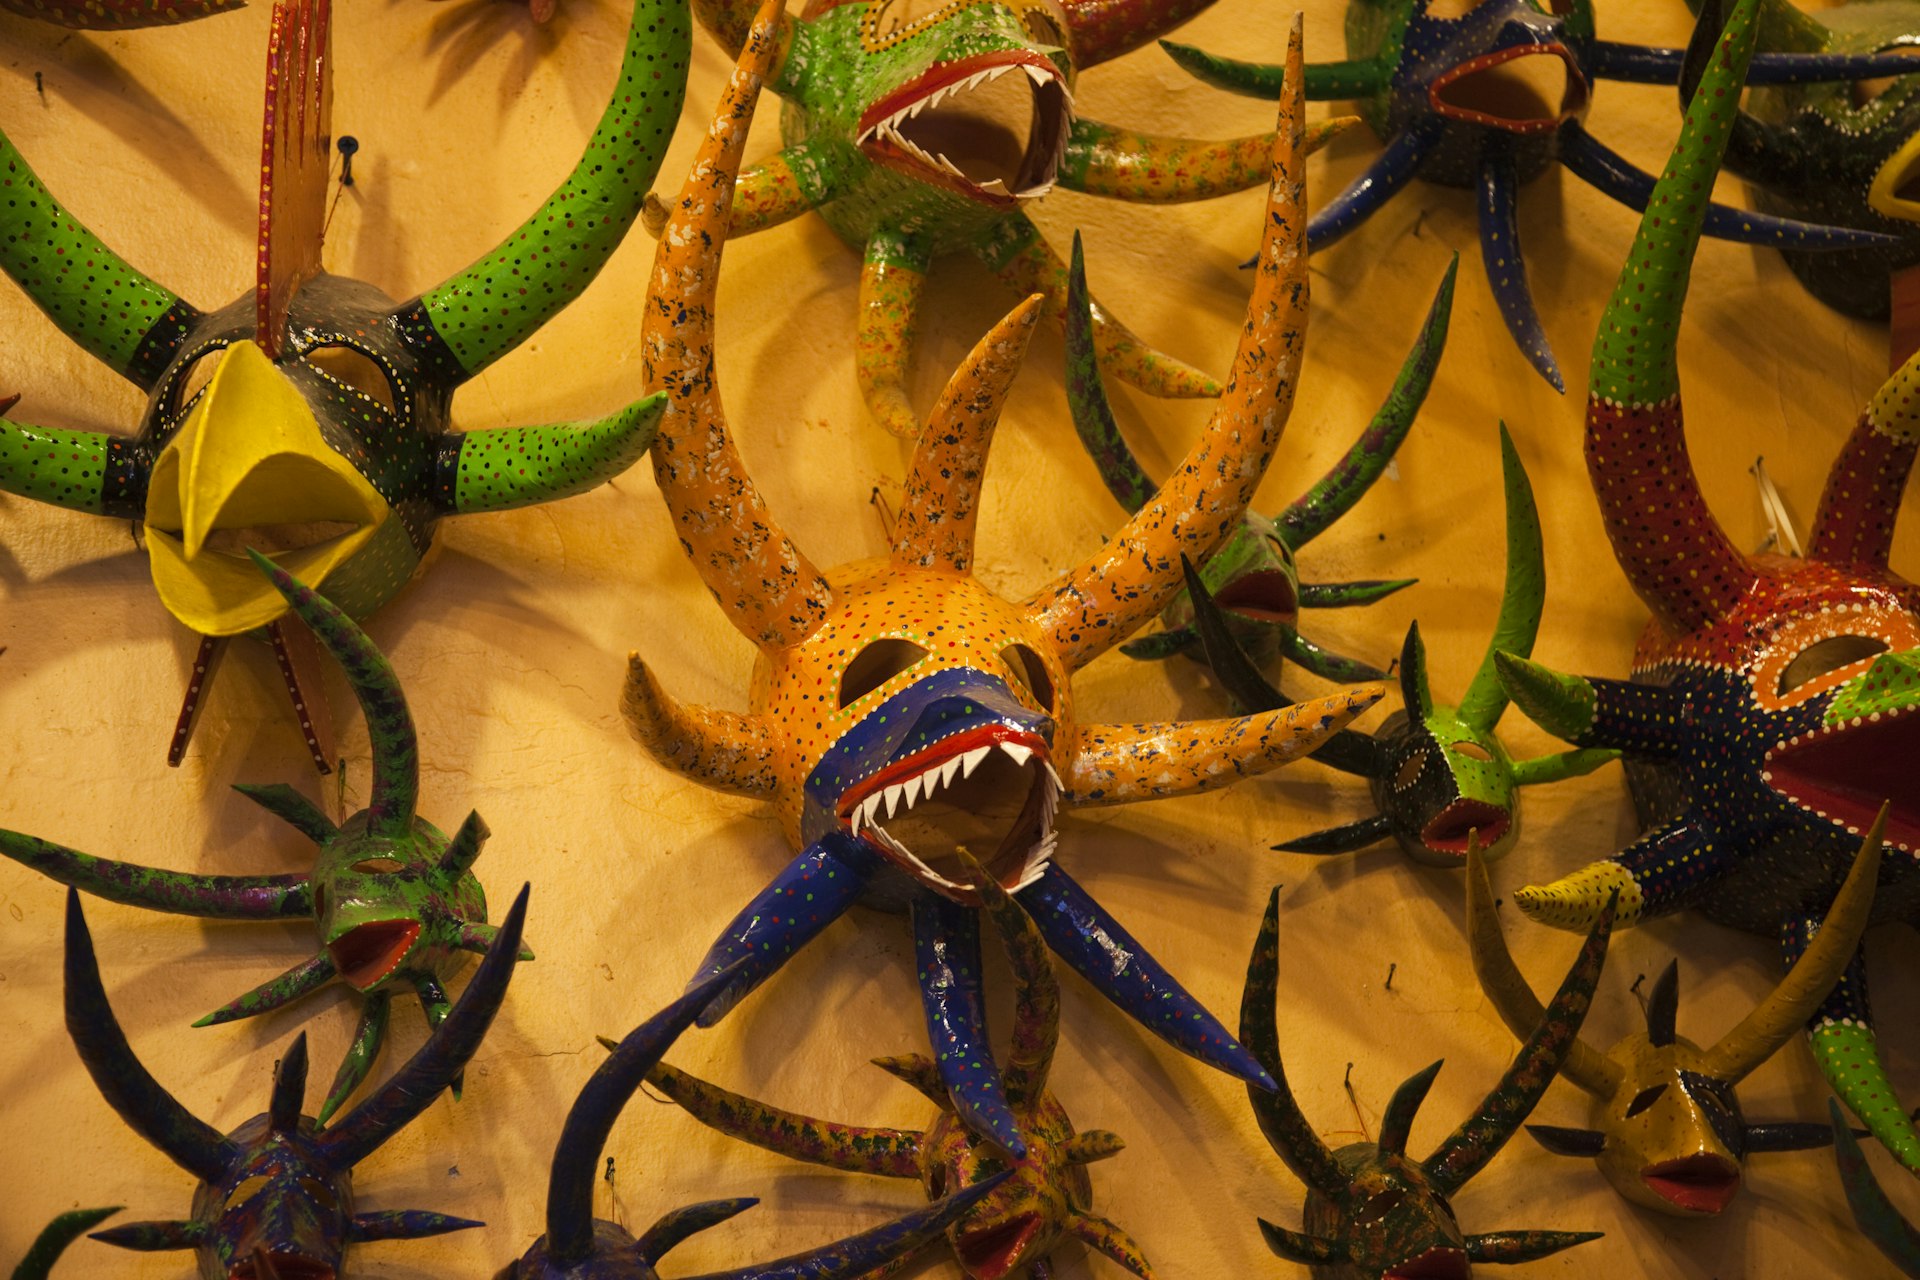 A collection of colorful masks with large horns, some with sharp teeth and another with a large beak are hung on a yellow wall.